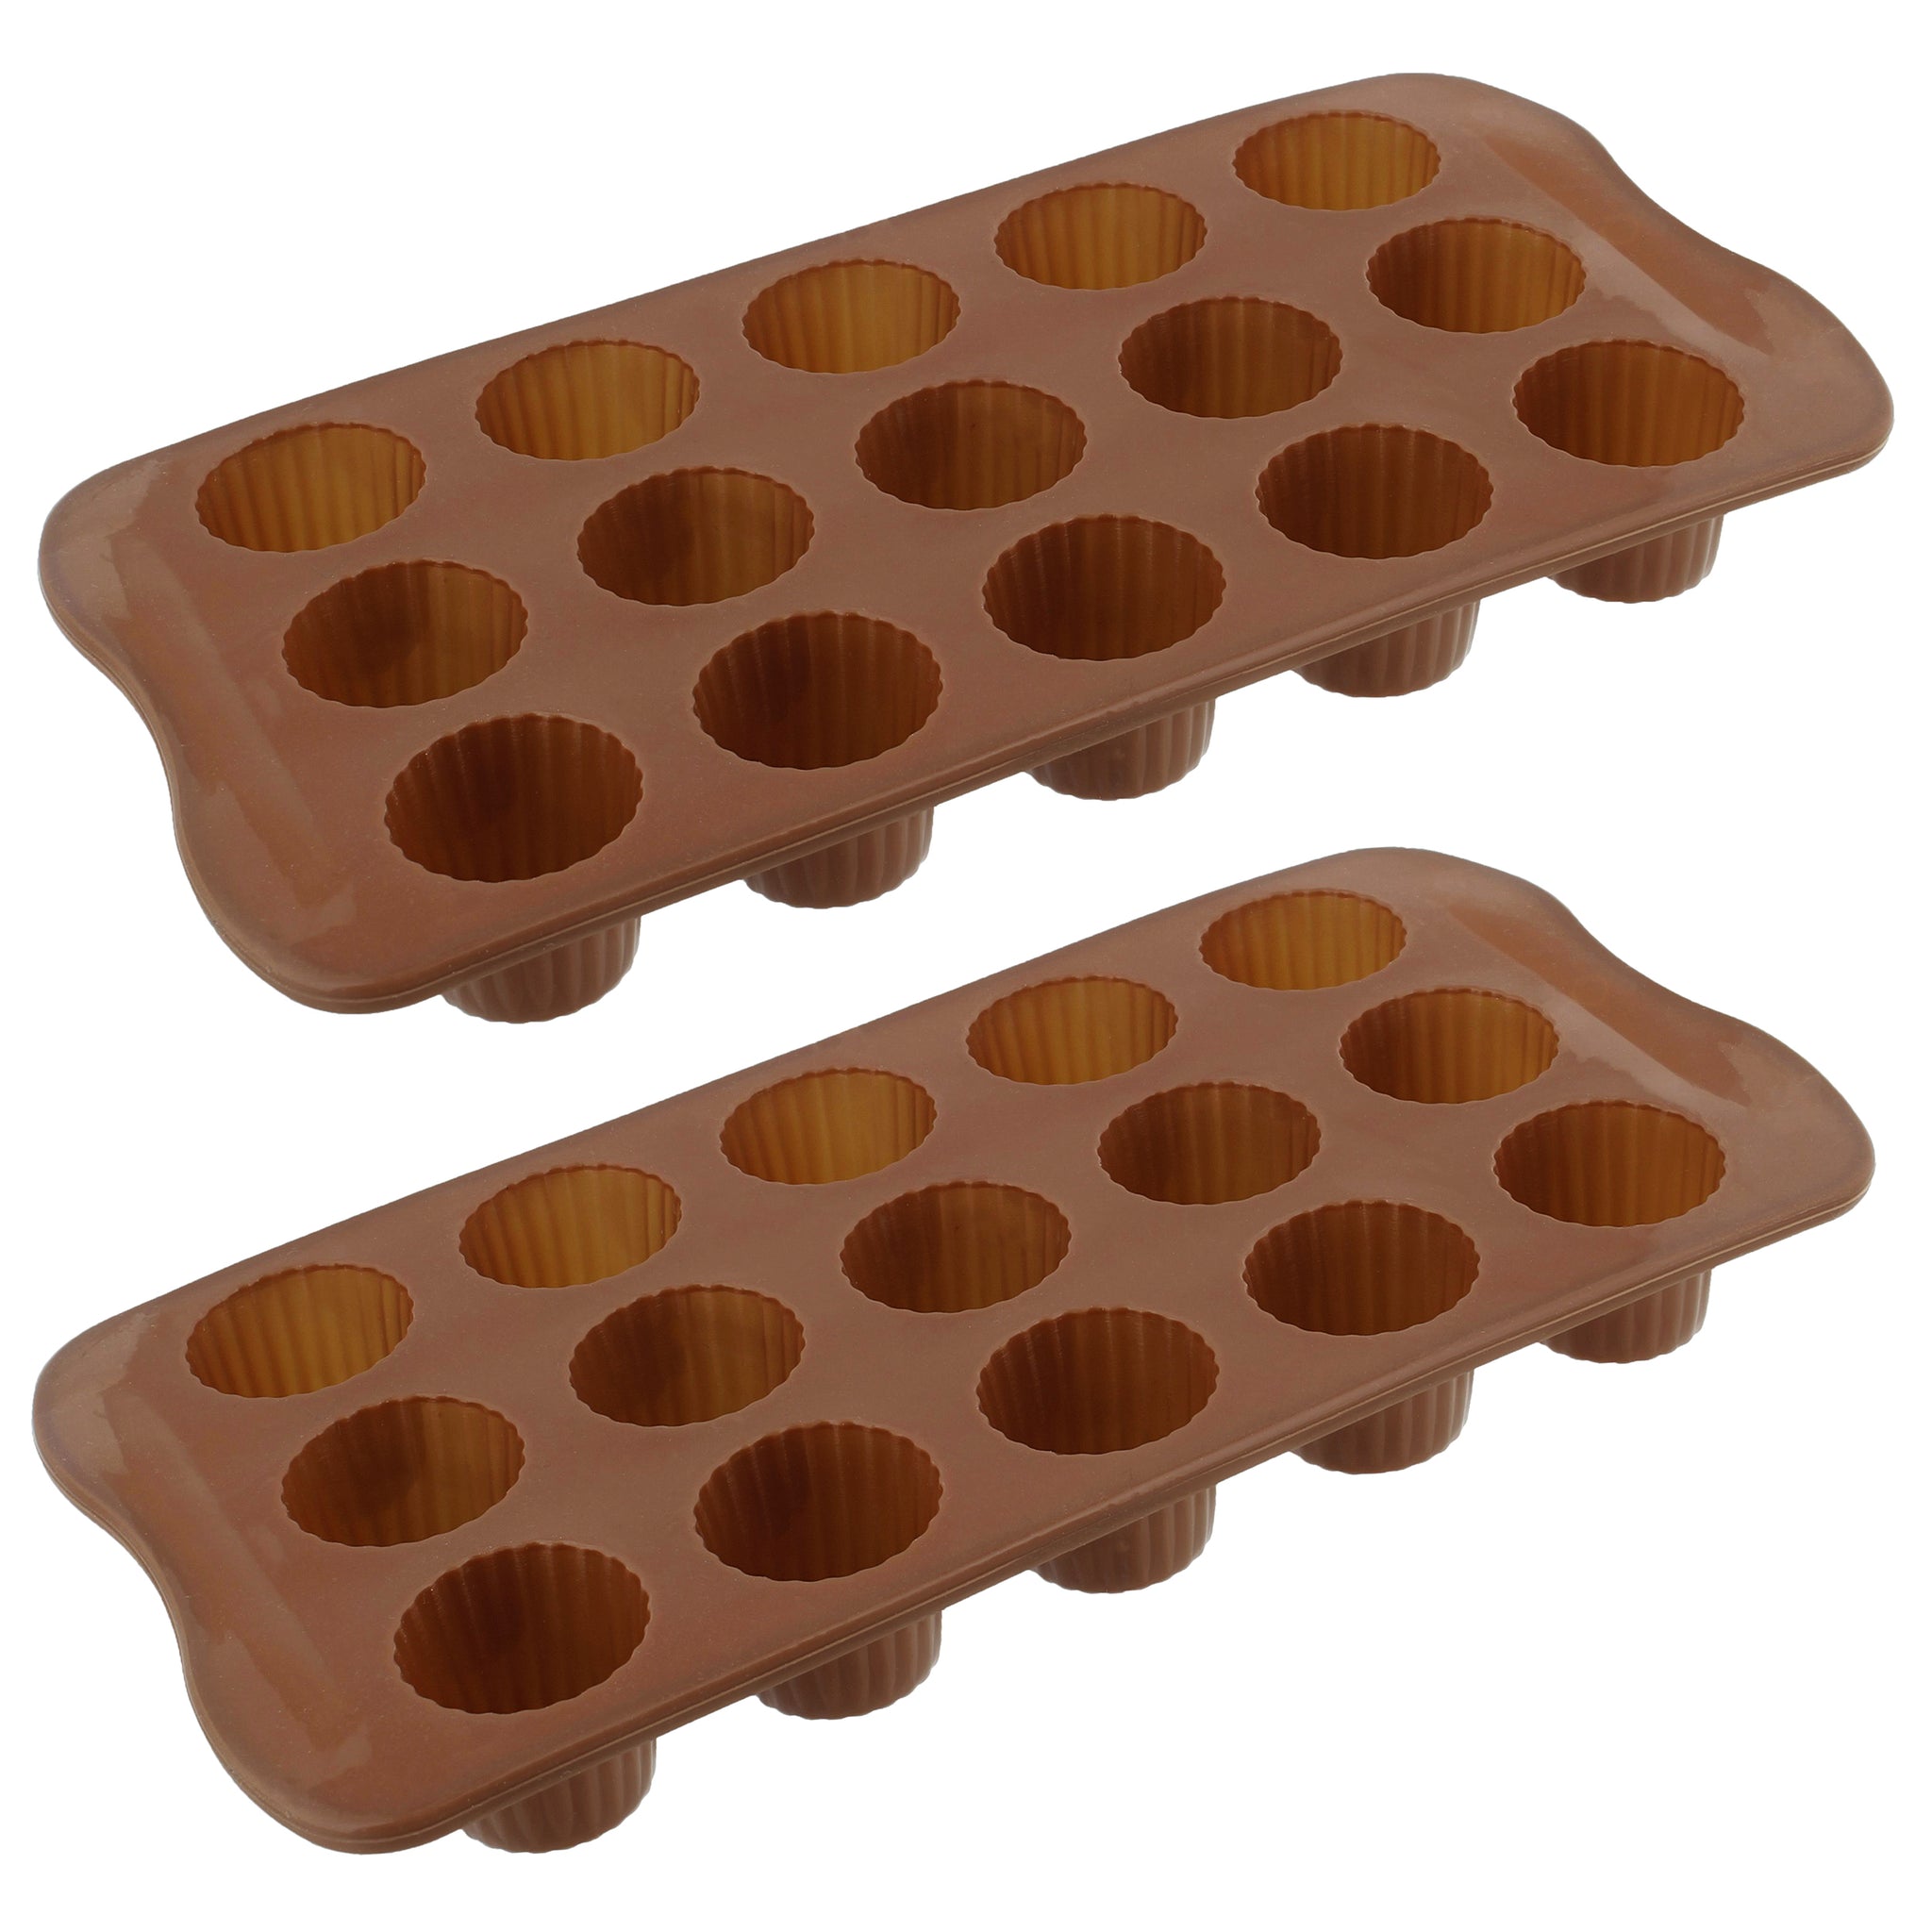 Silicone Mold Tray, 2pk - 15 Cavity Small Peanut Butter Cup Mold